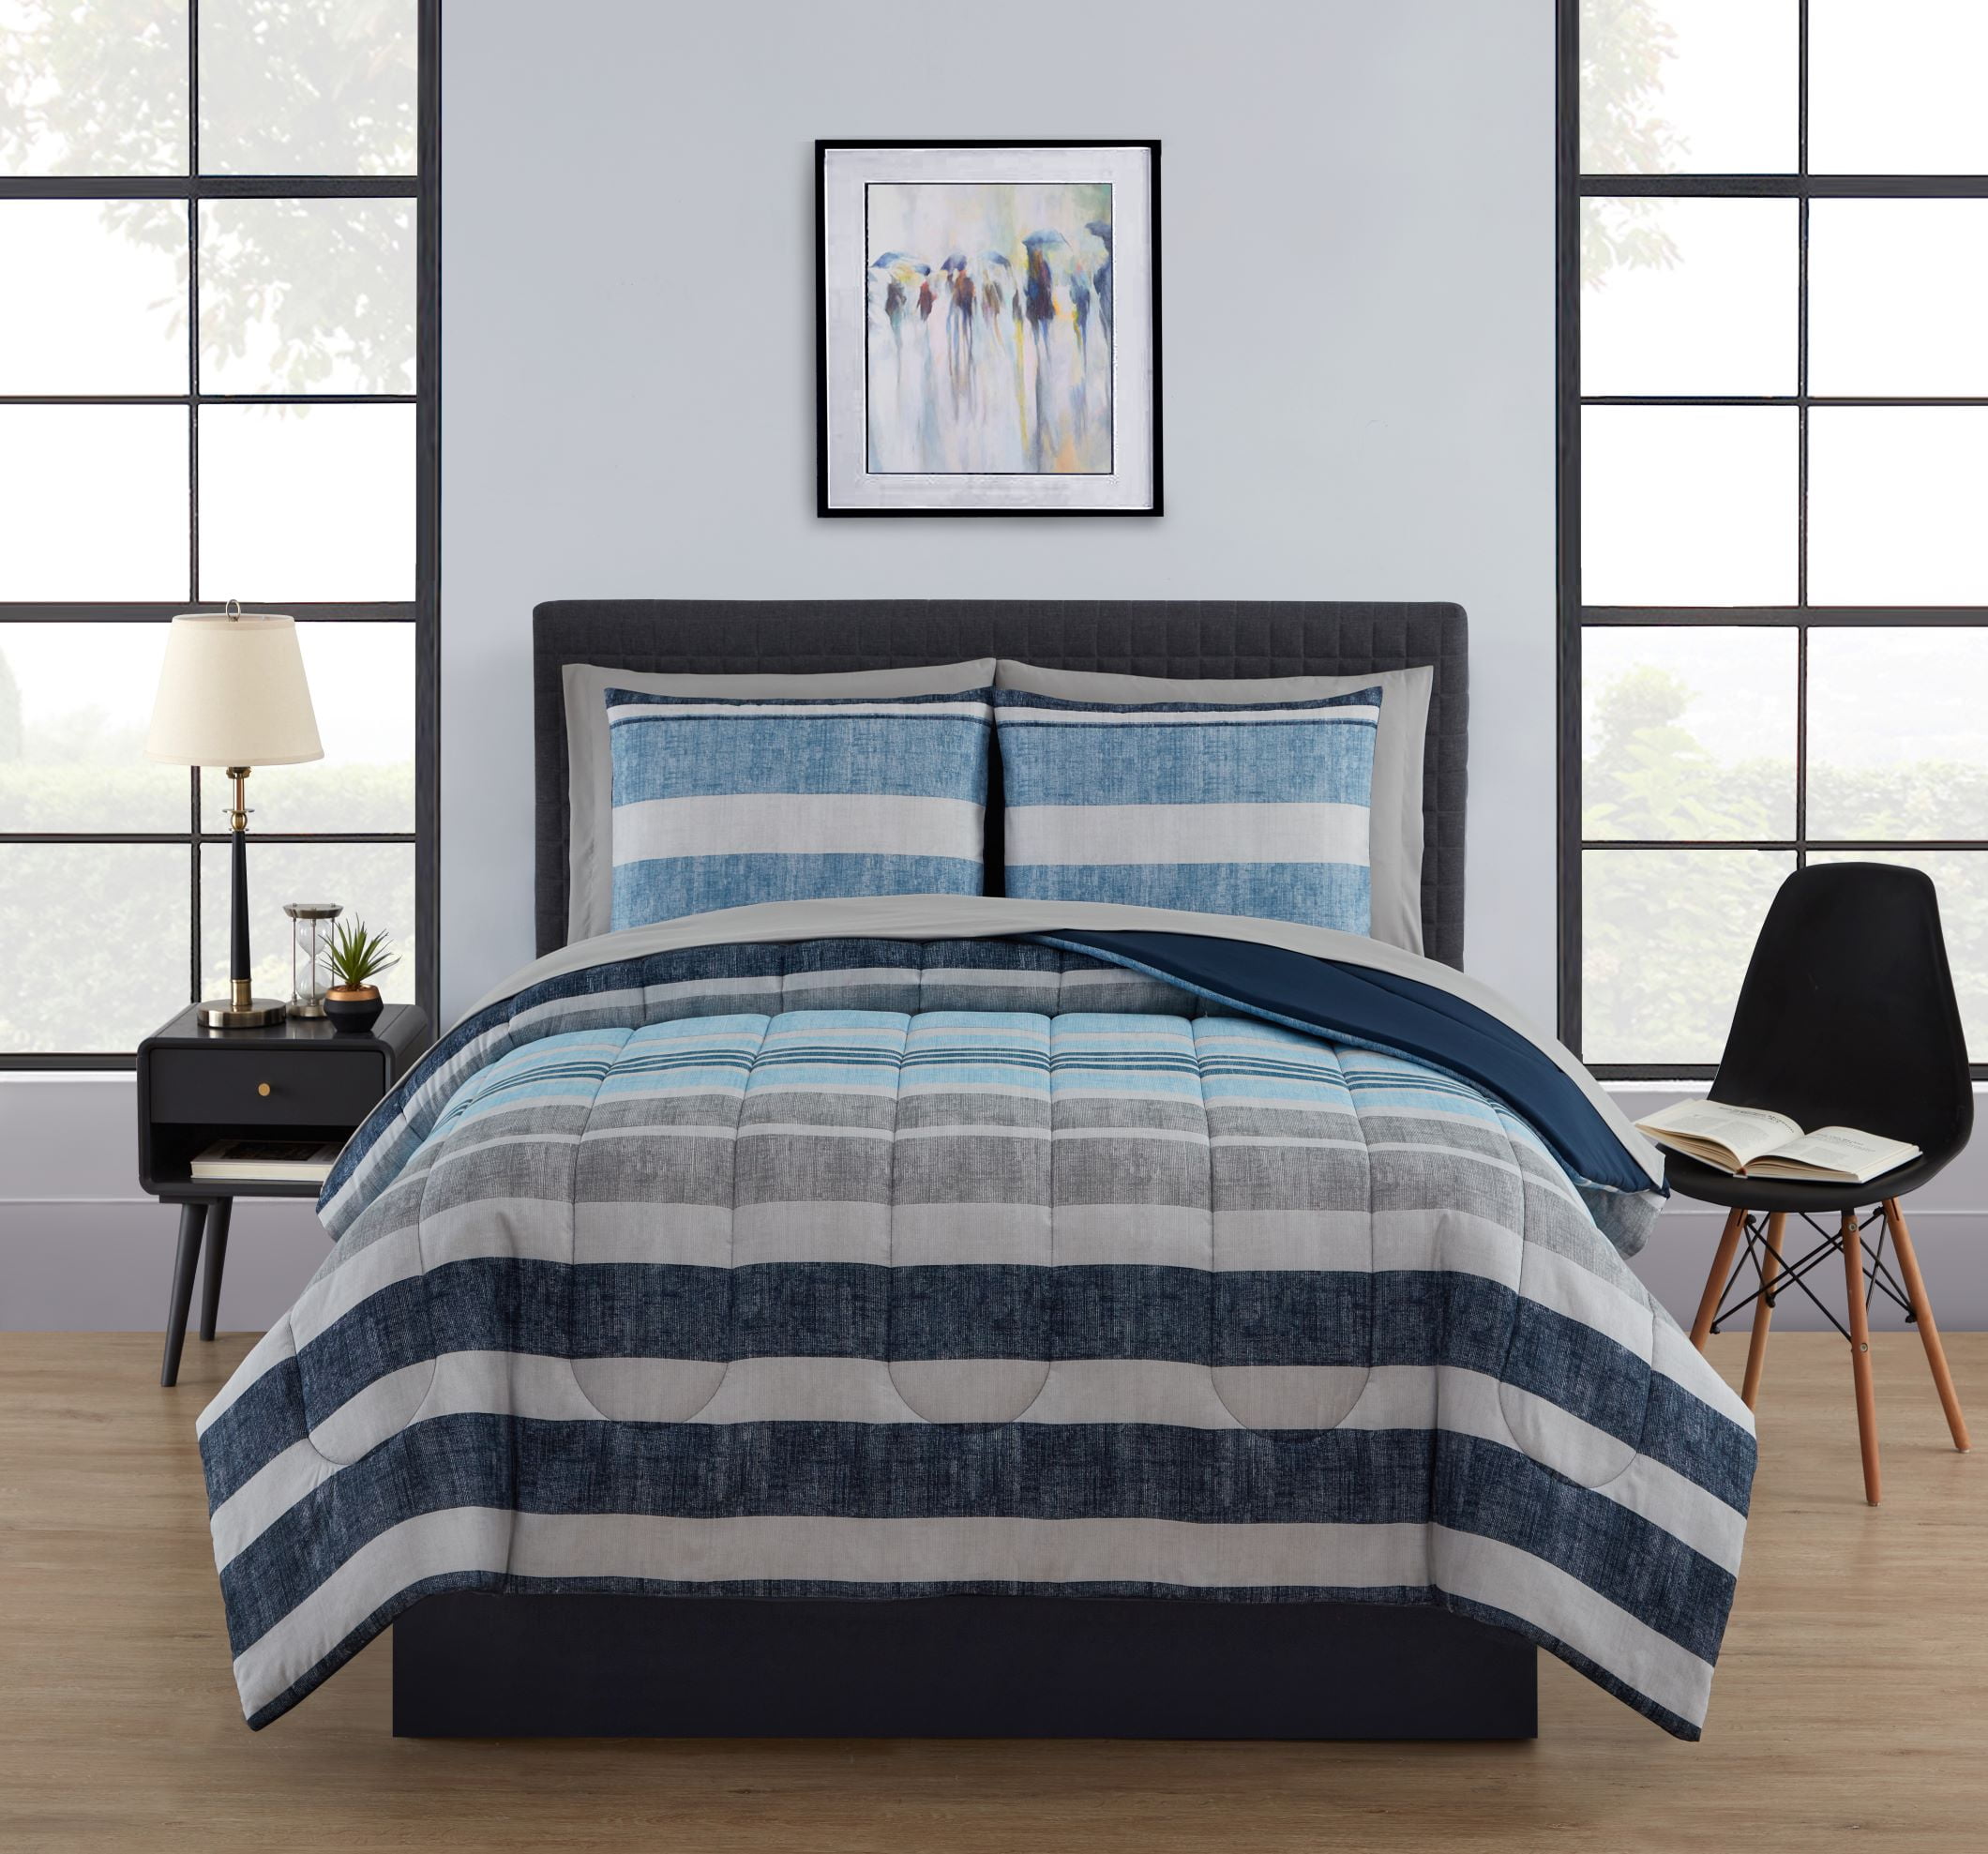 Mainstays Blue Stripe 7 Piece Bed in a Bag Comforter Set with Sheets, Queen